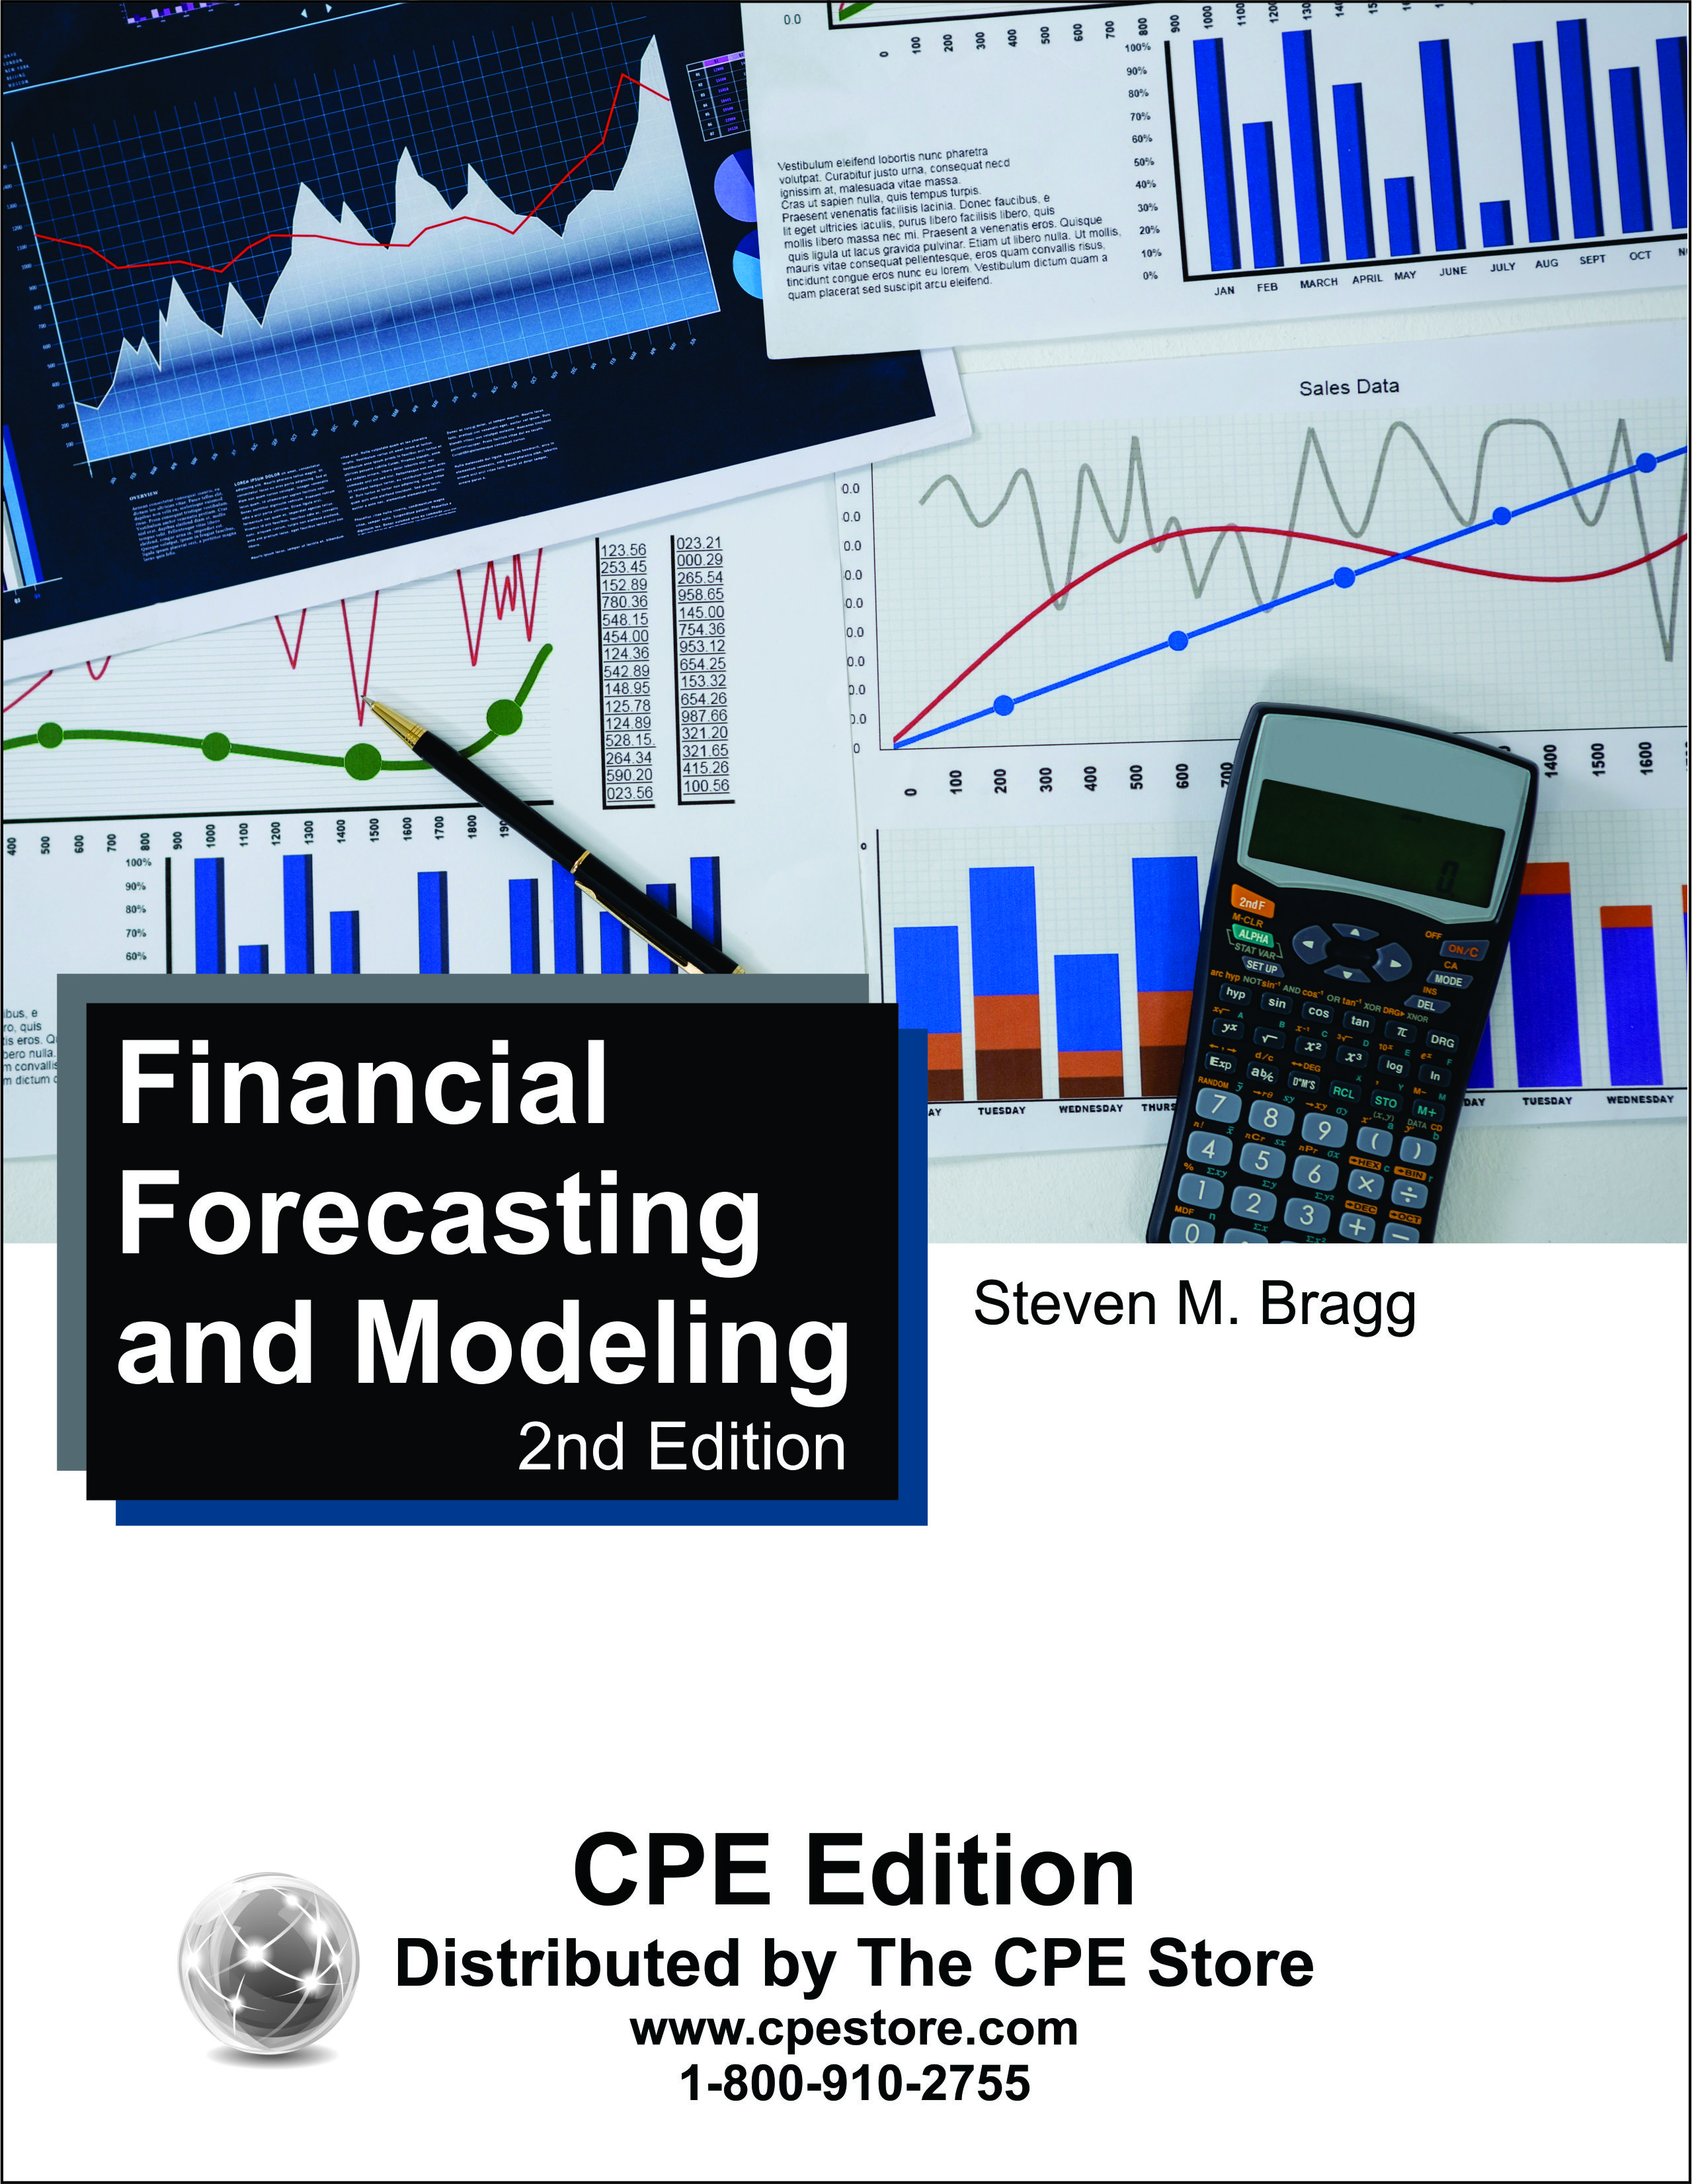 Financial Forecasting and Modeling